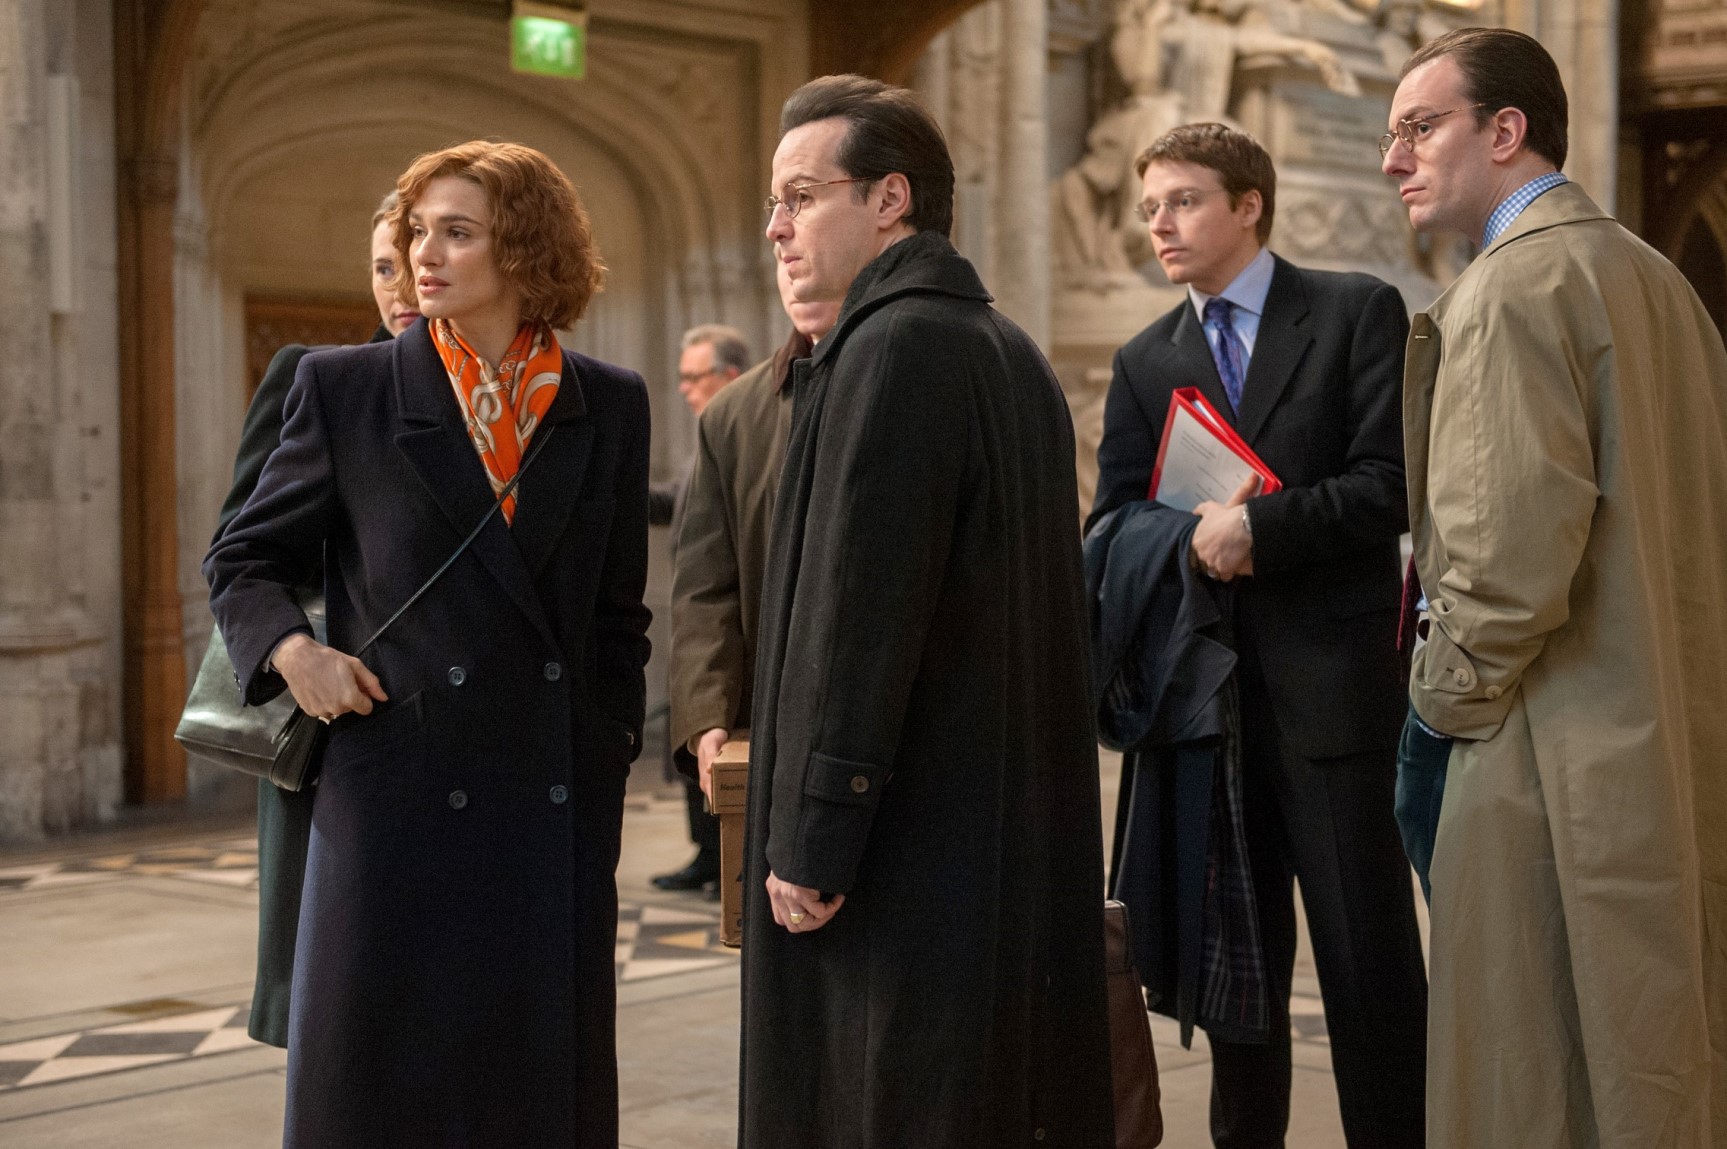 Opening film 'Denial' tells the real story of Prof. Deborah Lipstadt, who was sued by controversial historian David Irving after she labeled him a Holocaust denier. Photo courtesy